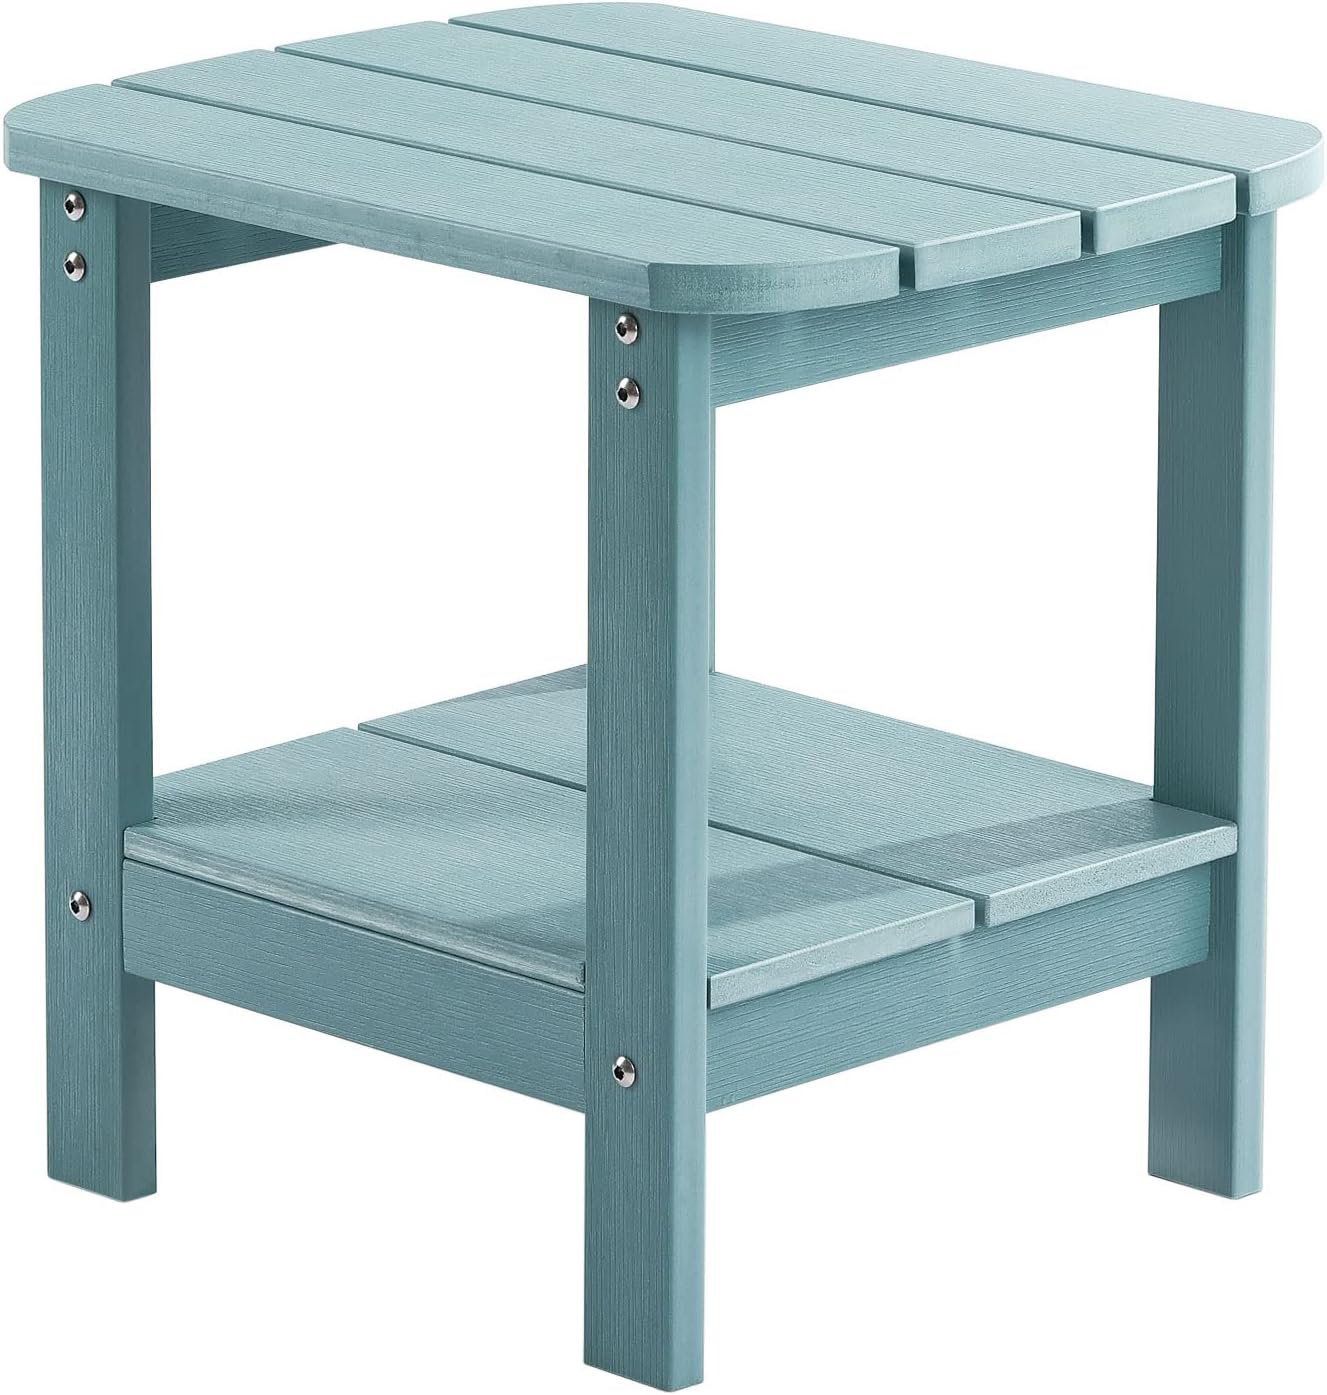 Adirondack Outdoor Side Table